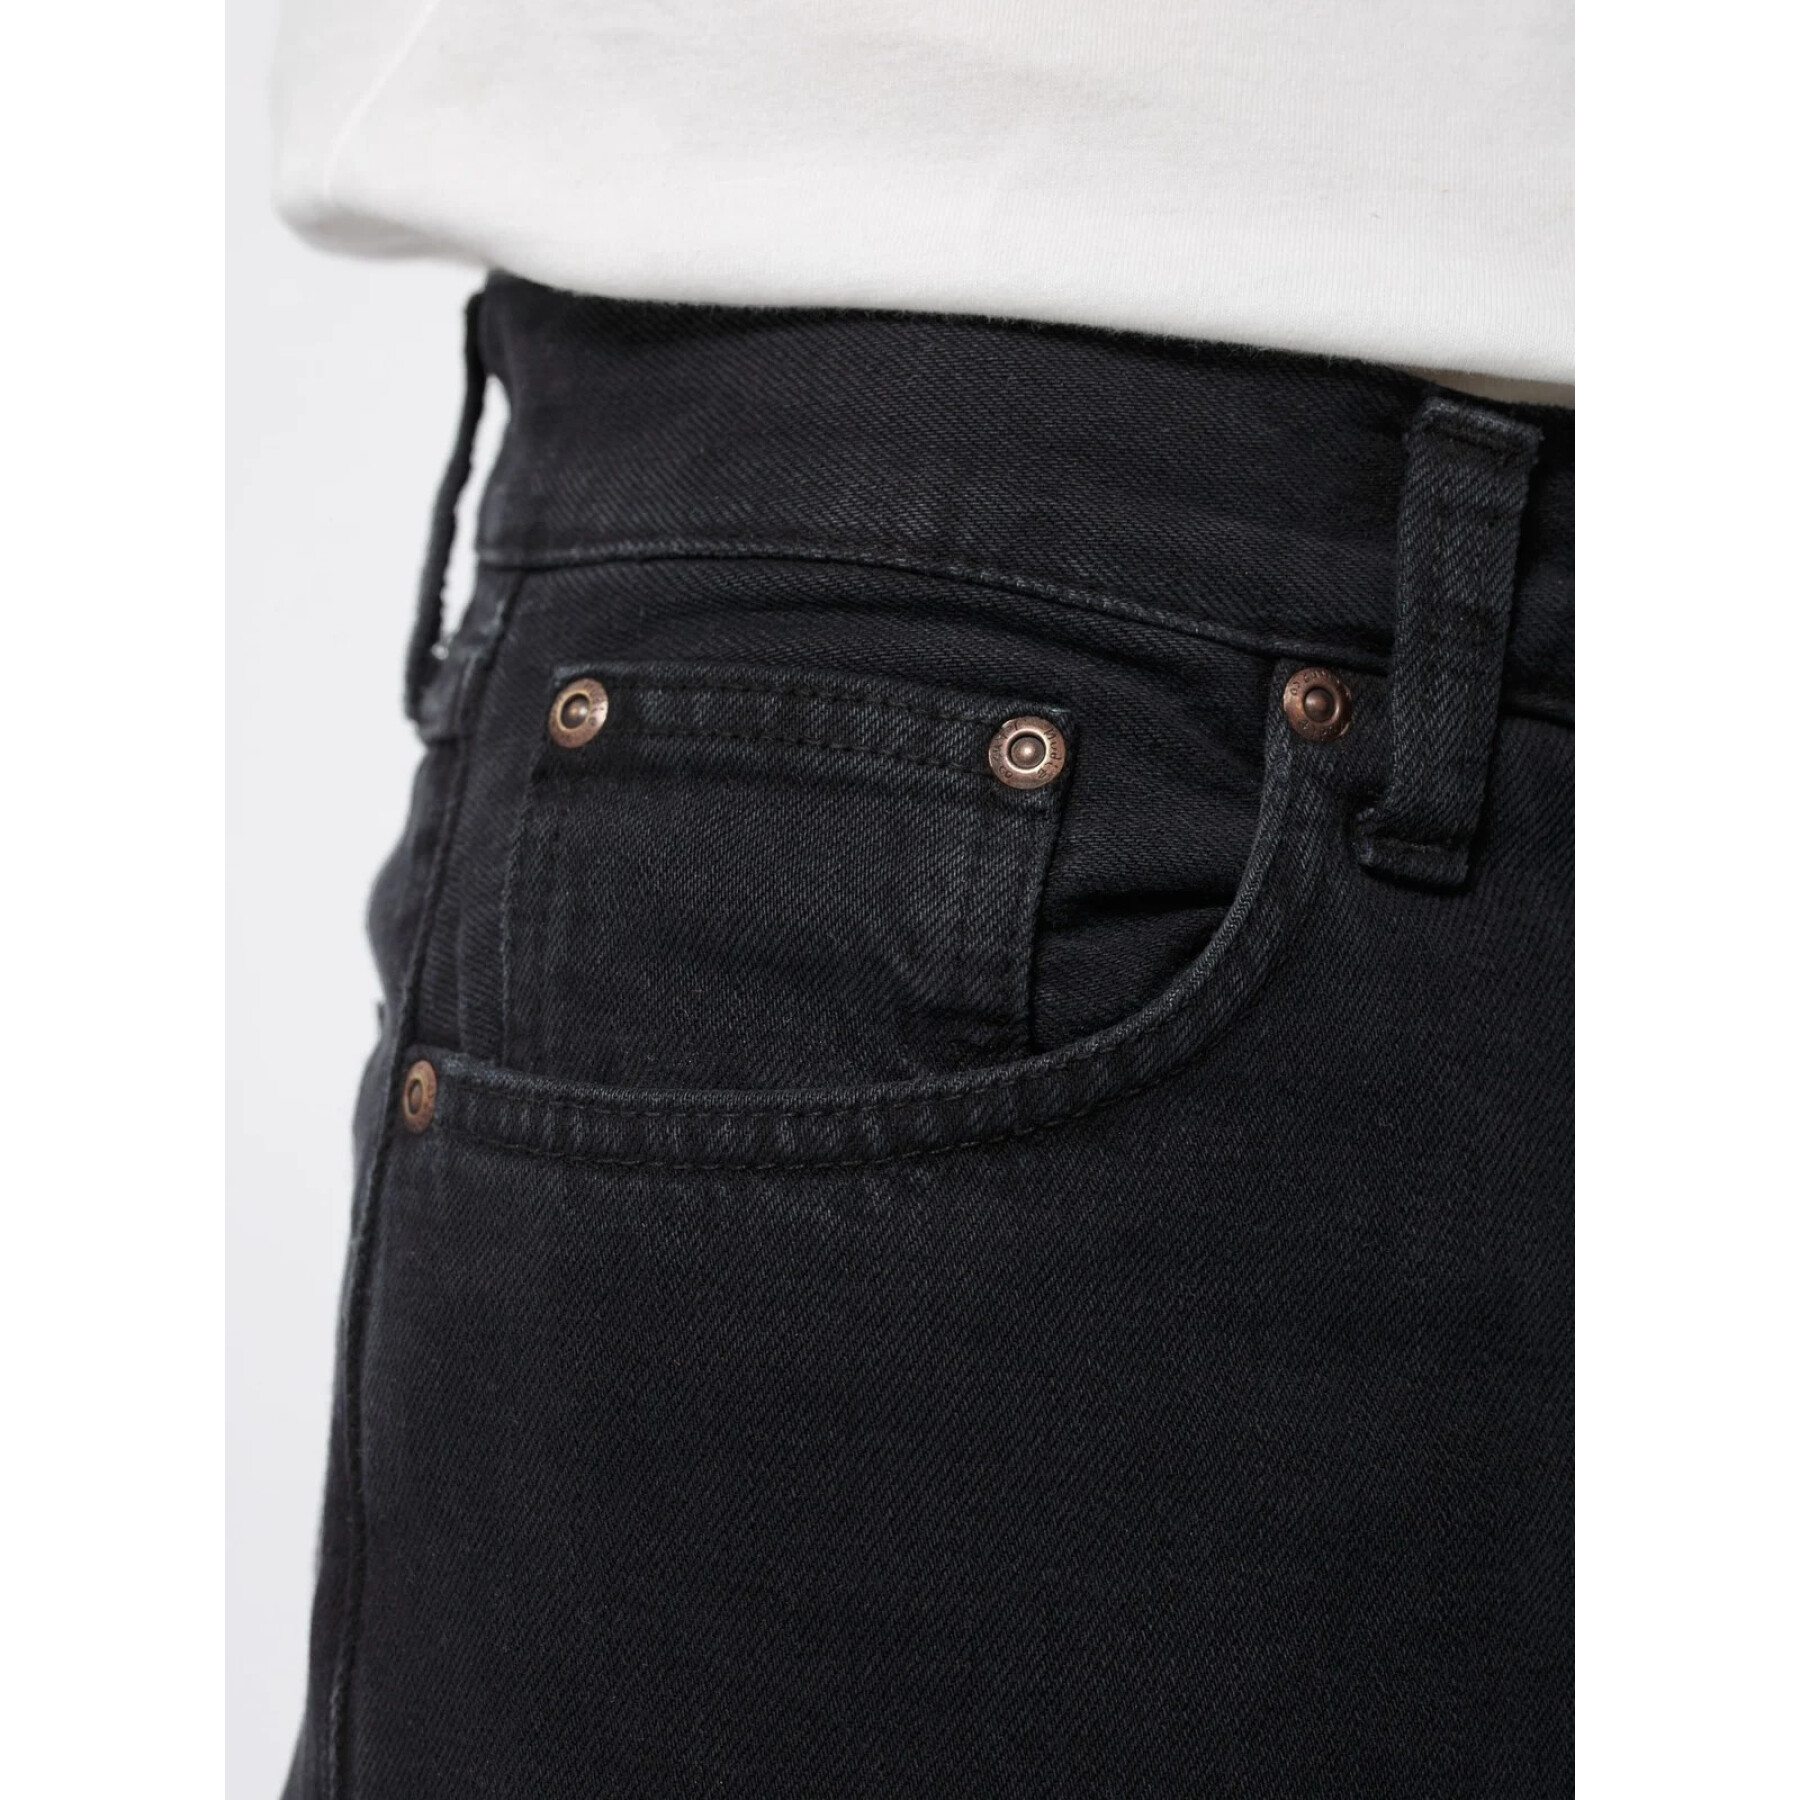 Jeans Nudie Jeans Gritty Jackson